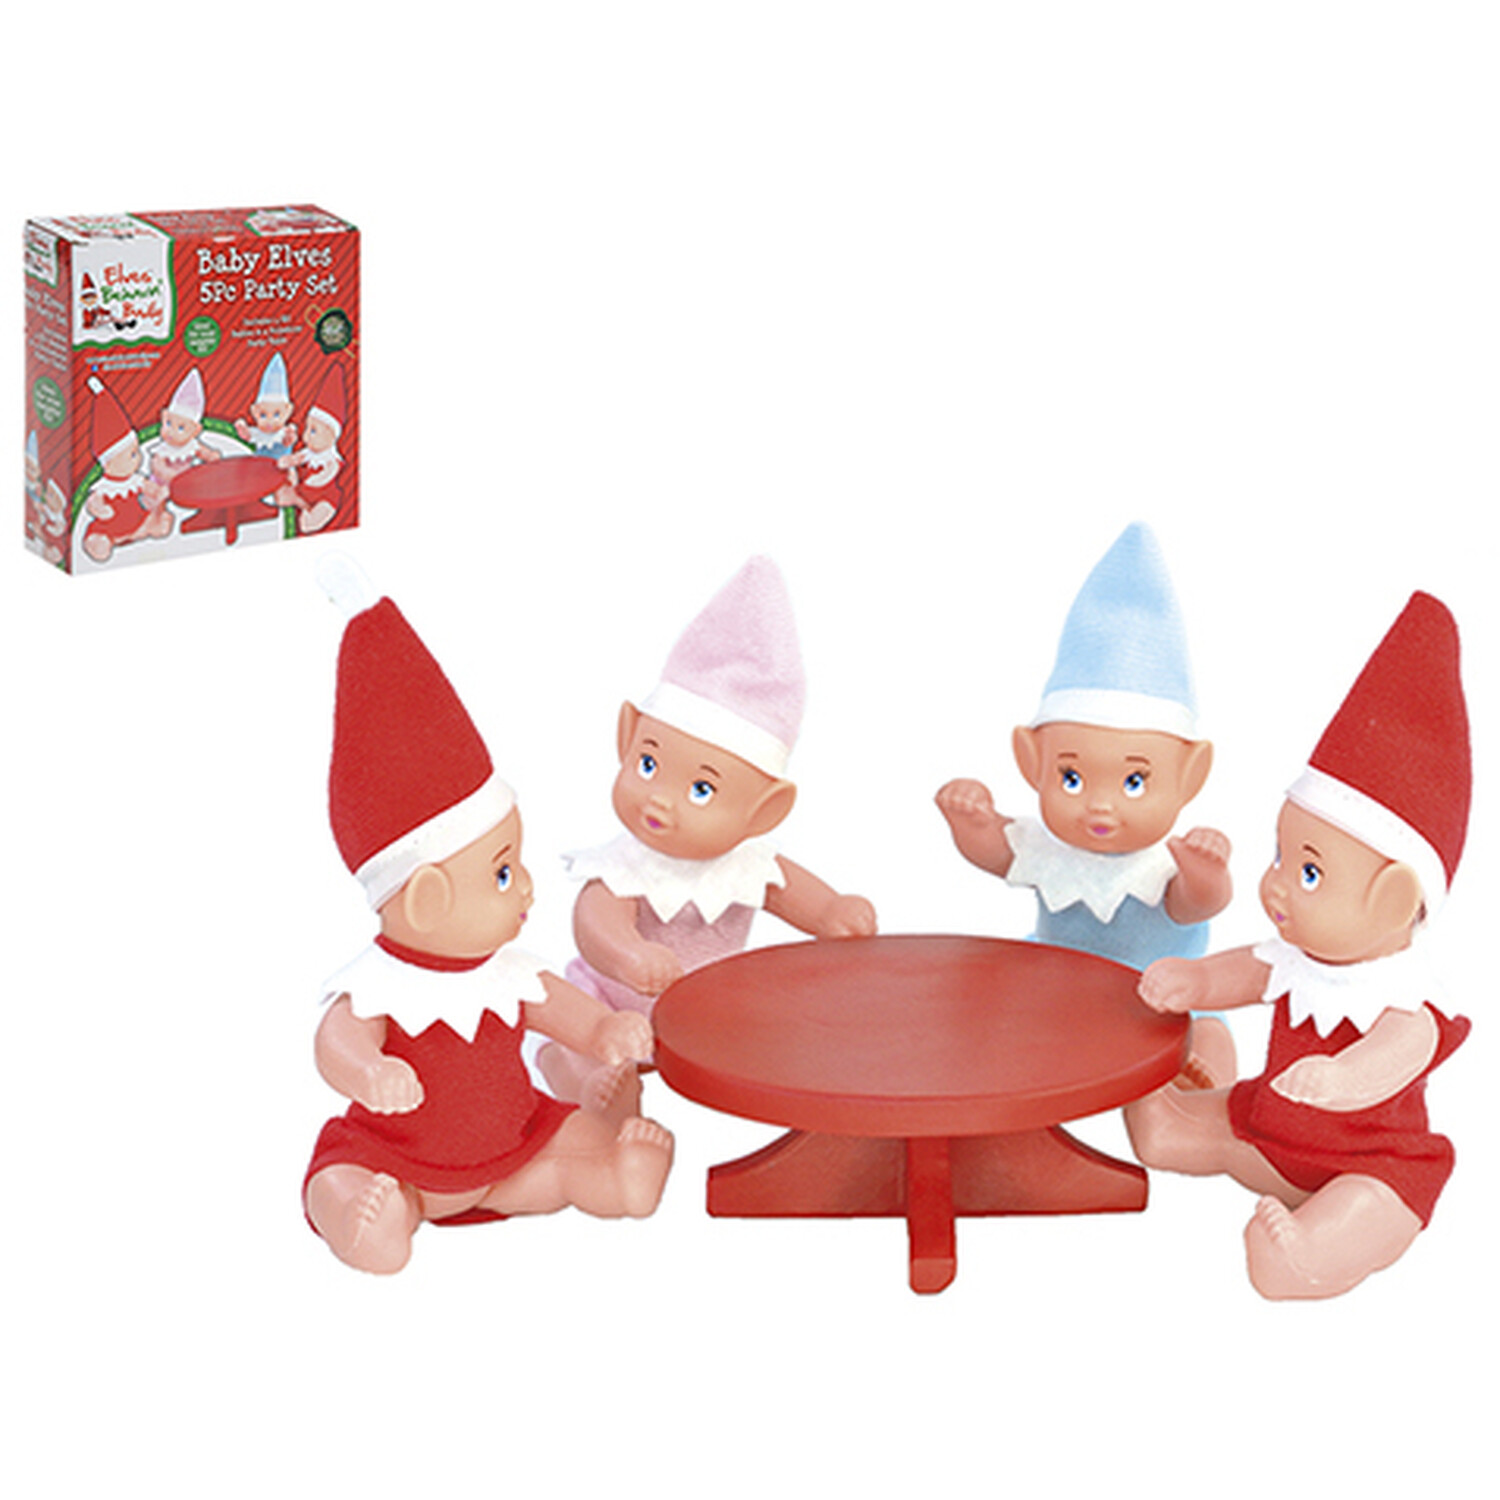 5-Piece Baby Elves Party Set - Red Image